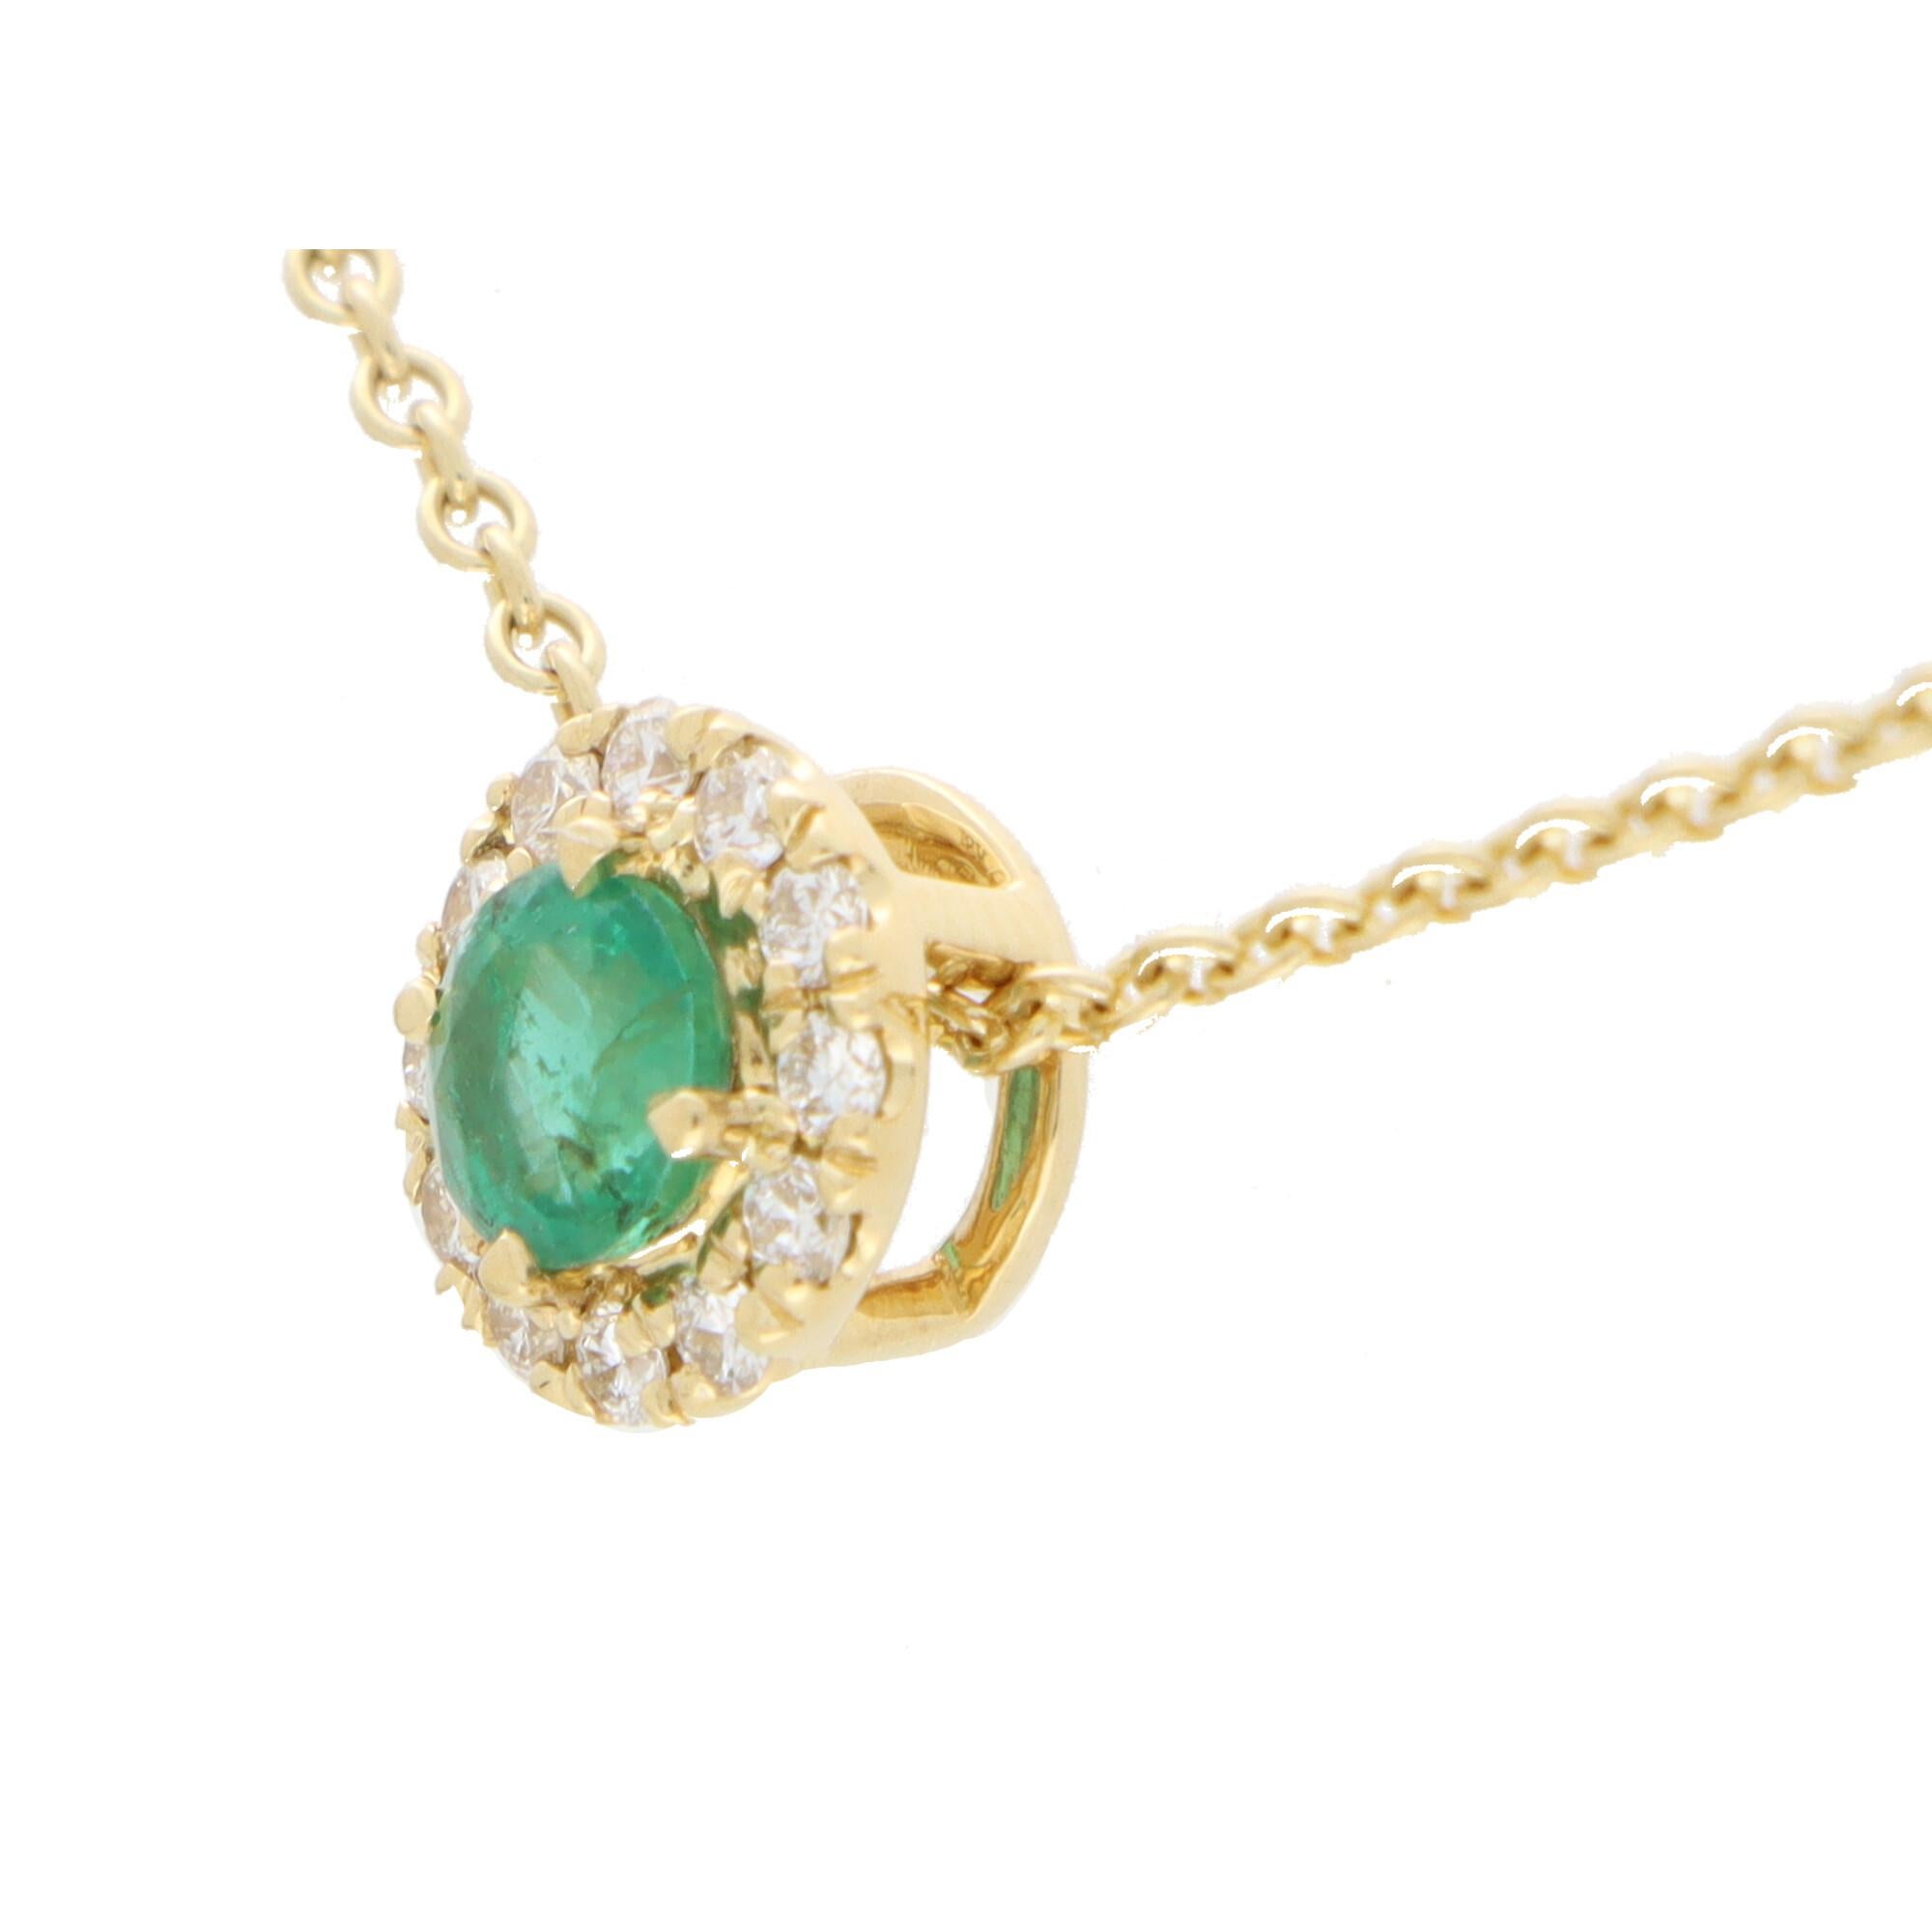 Round Cut Emerald and Diamond Cluster Pendant Necklace Set in 18k Yellow Gold